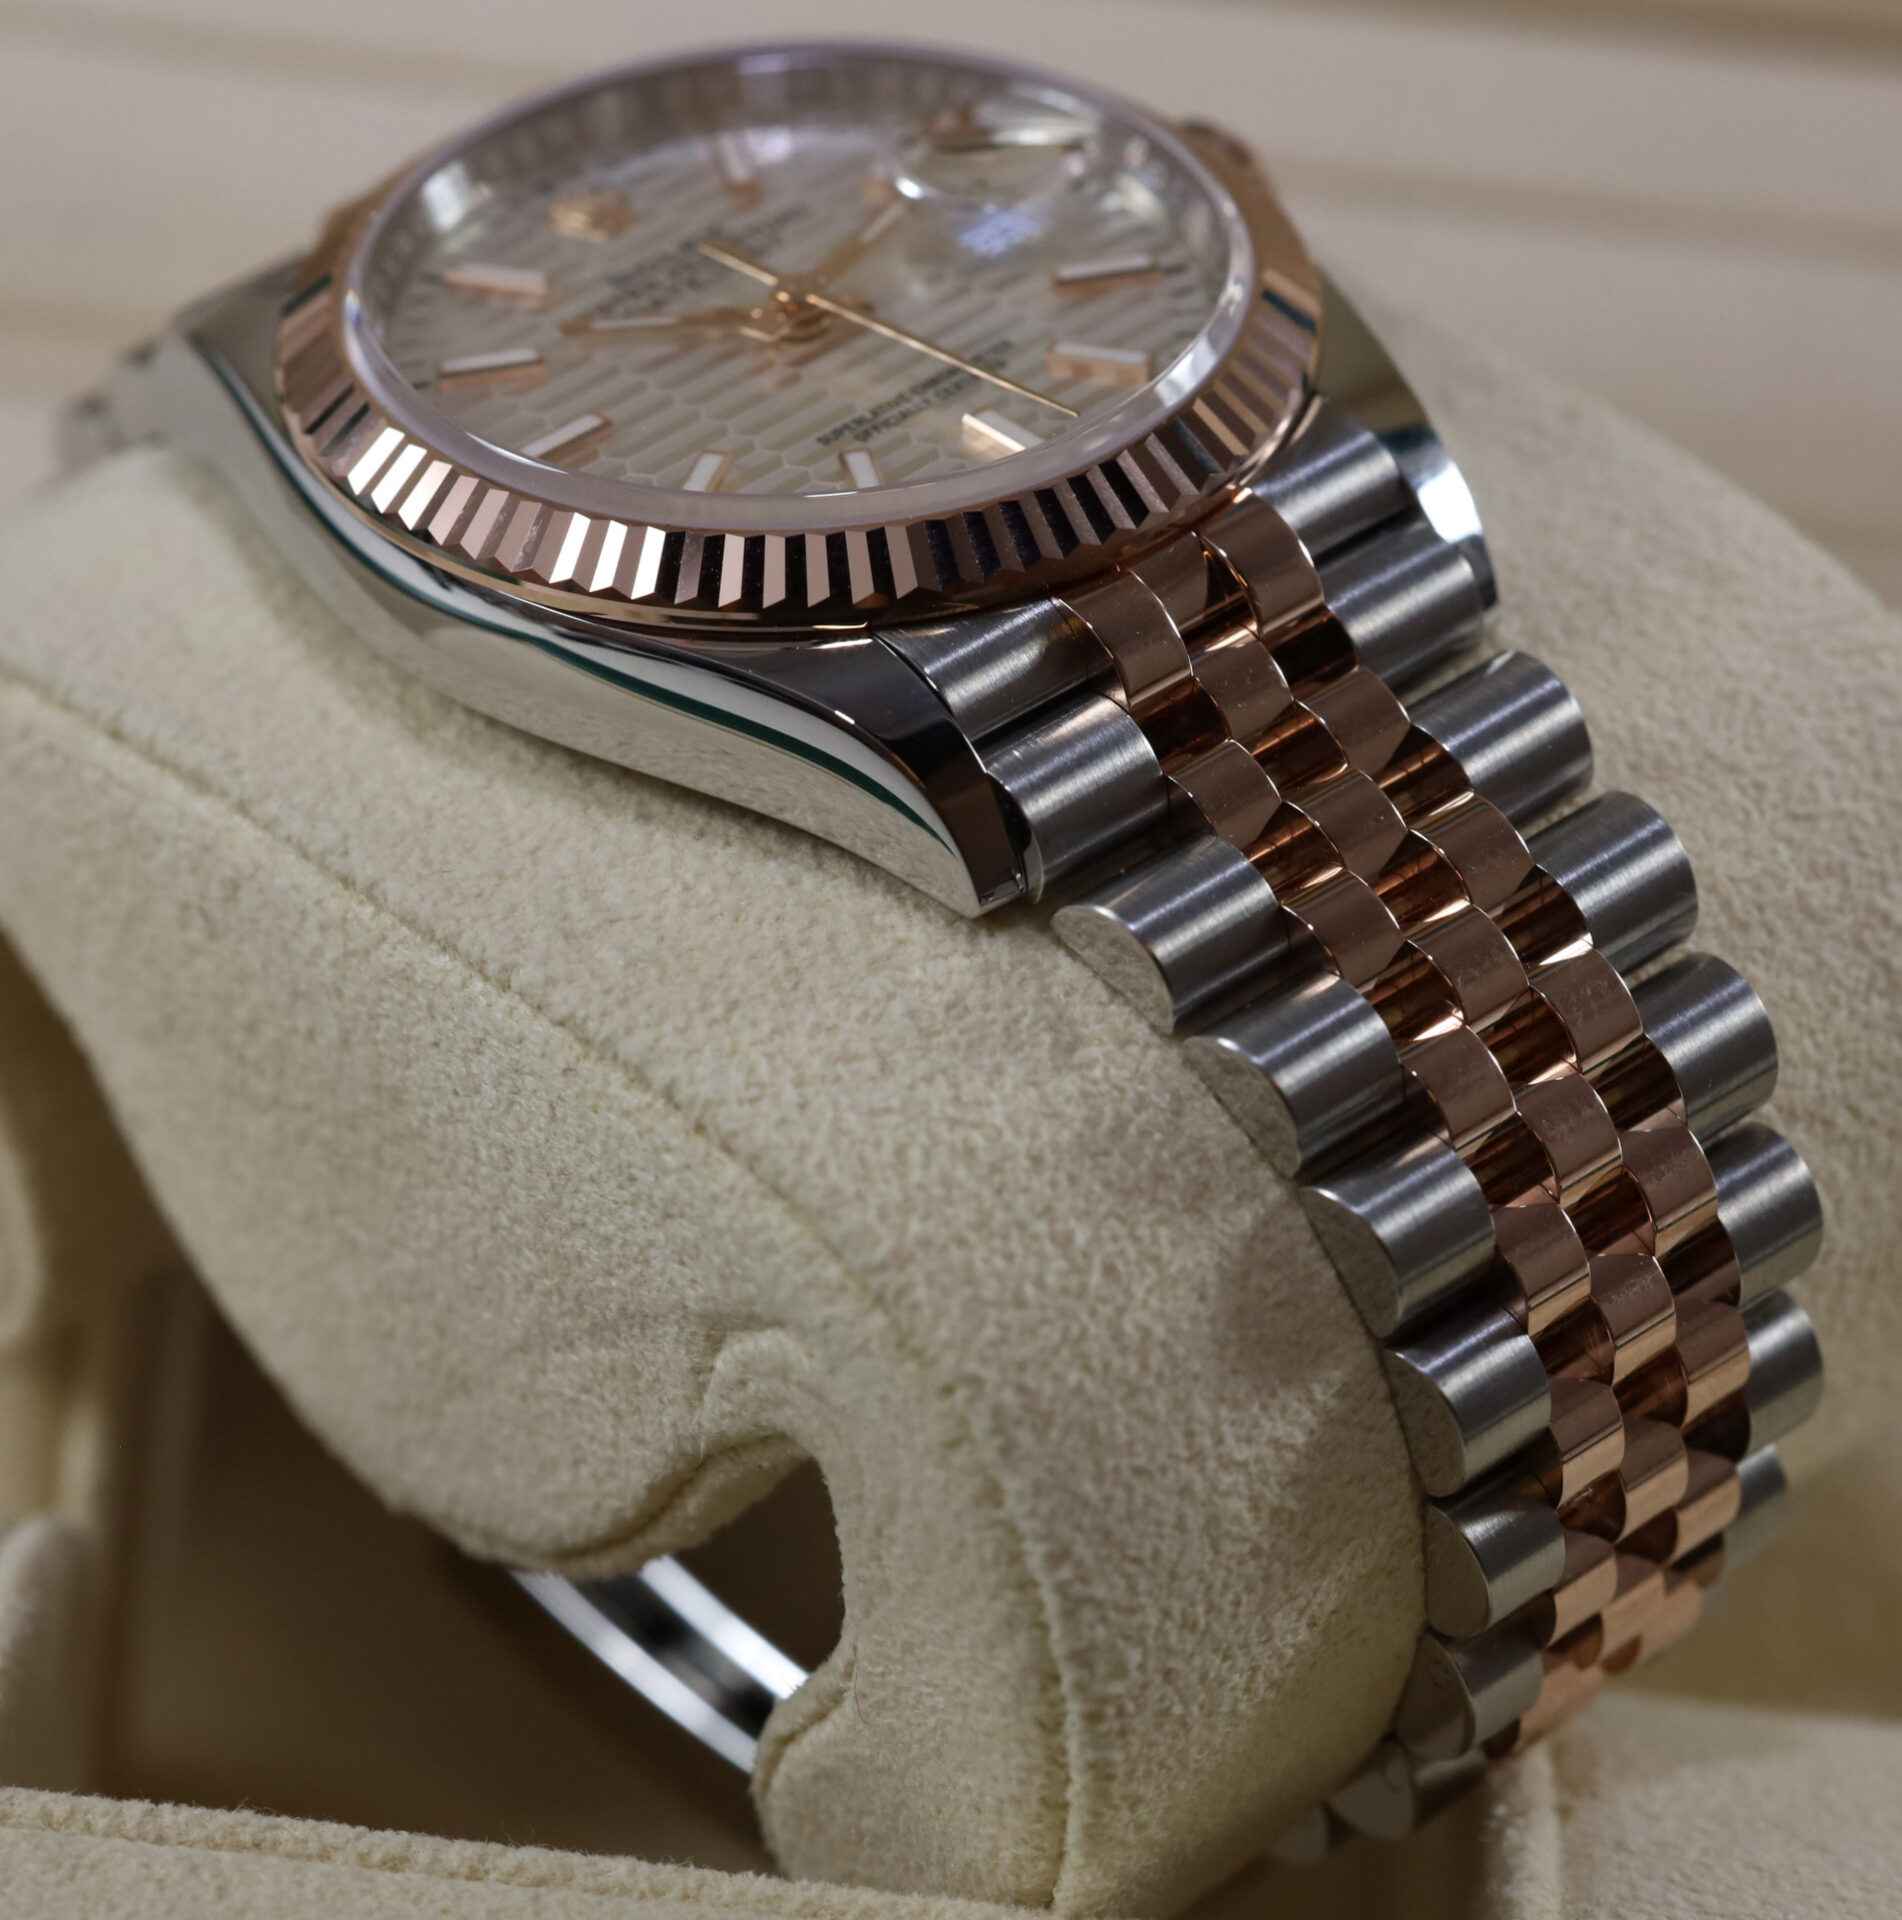 Rolex - Unworn Two Tone Rose Gold Silver Motif Datejust 126231 36mm – David  and Sons Timepieces